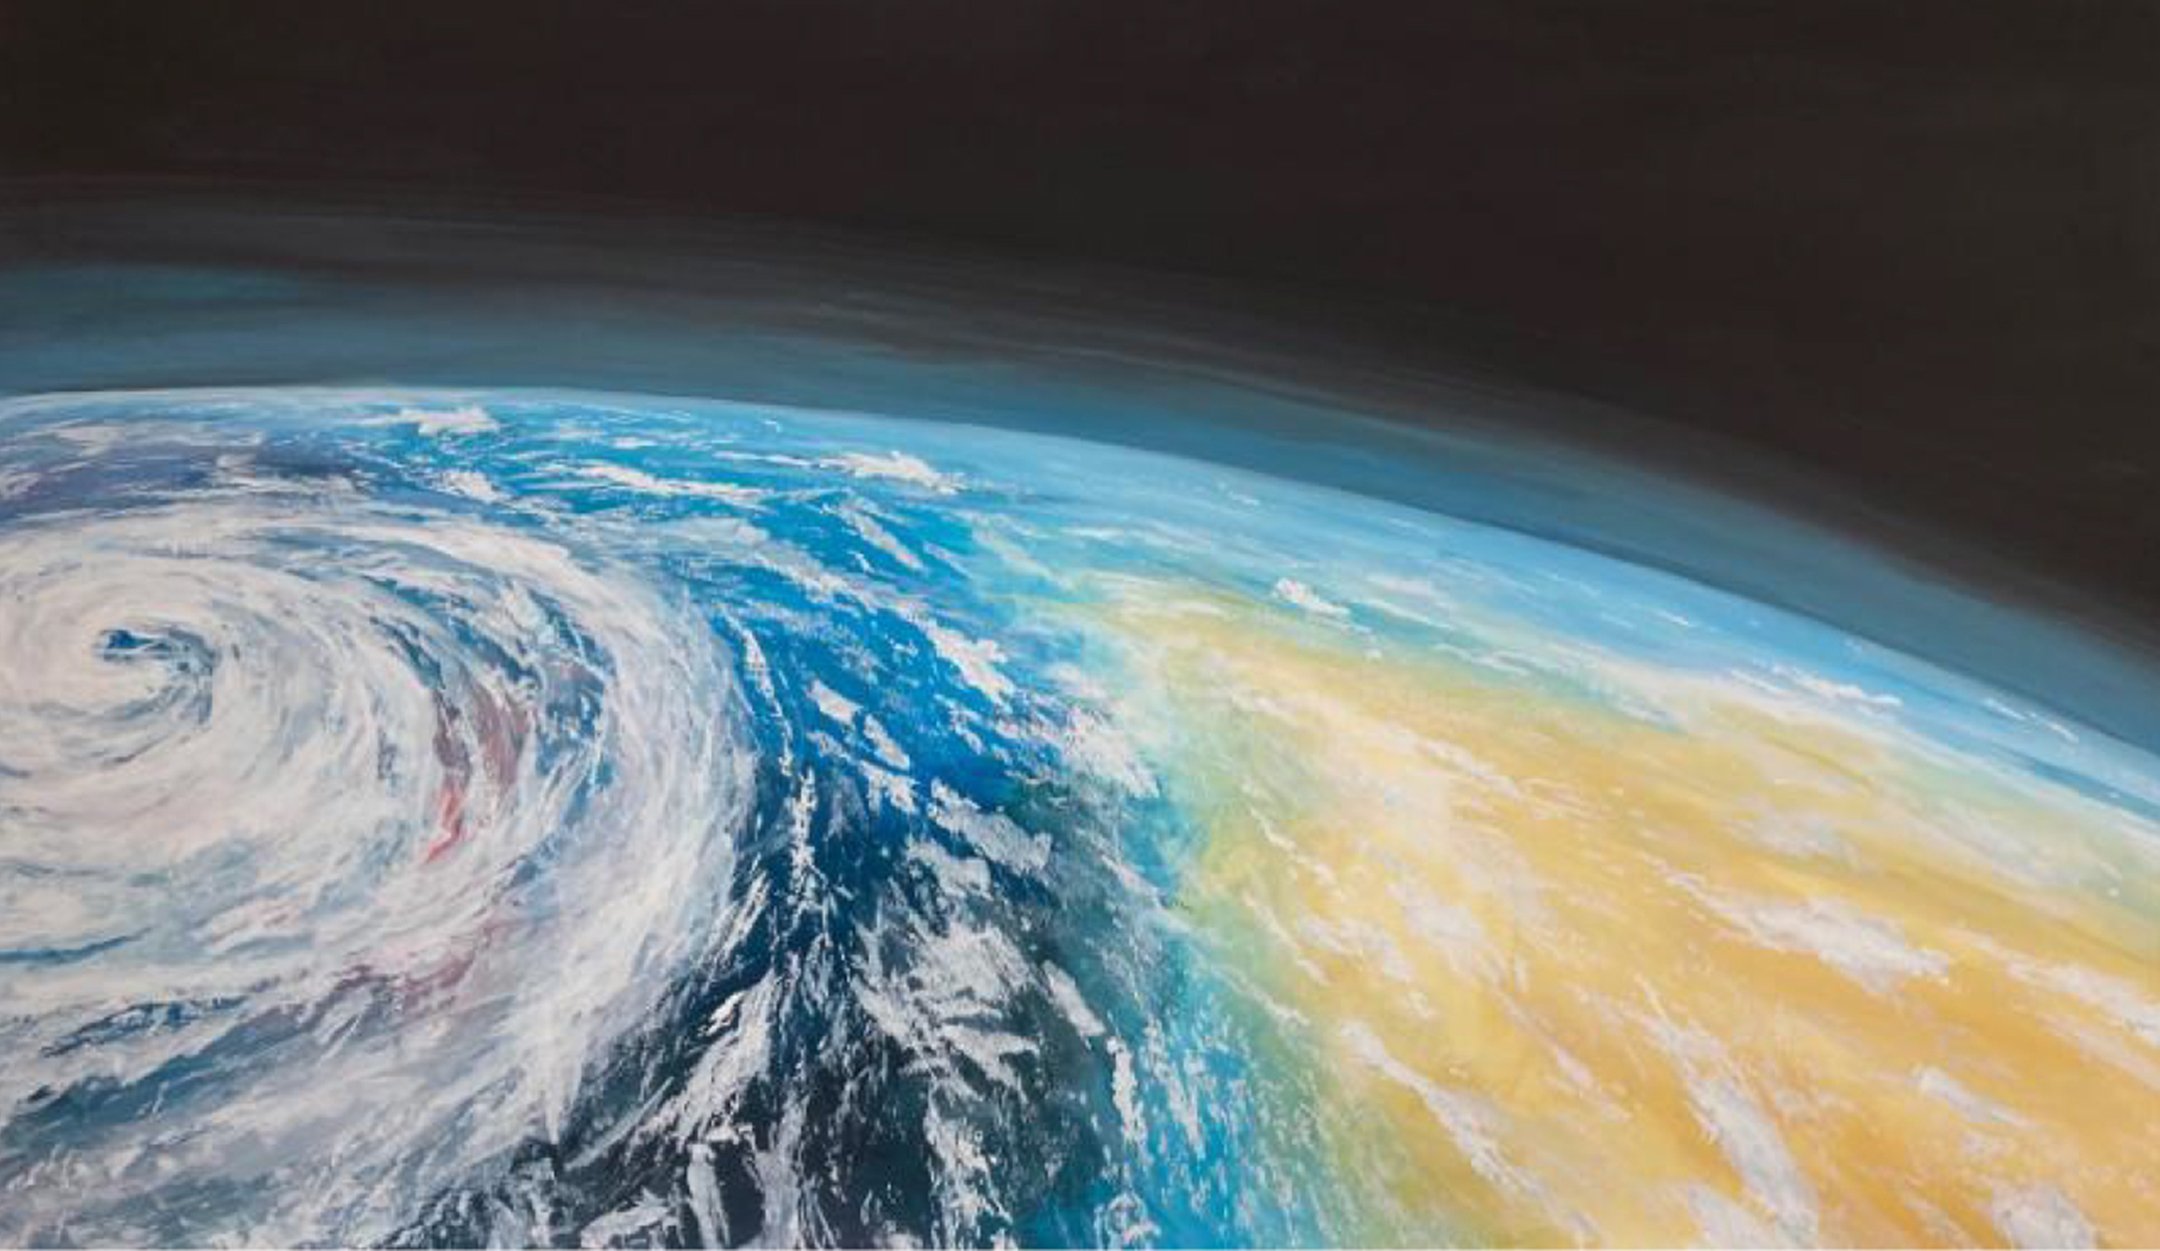 Painting of earth scene from orbit